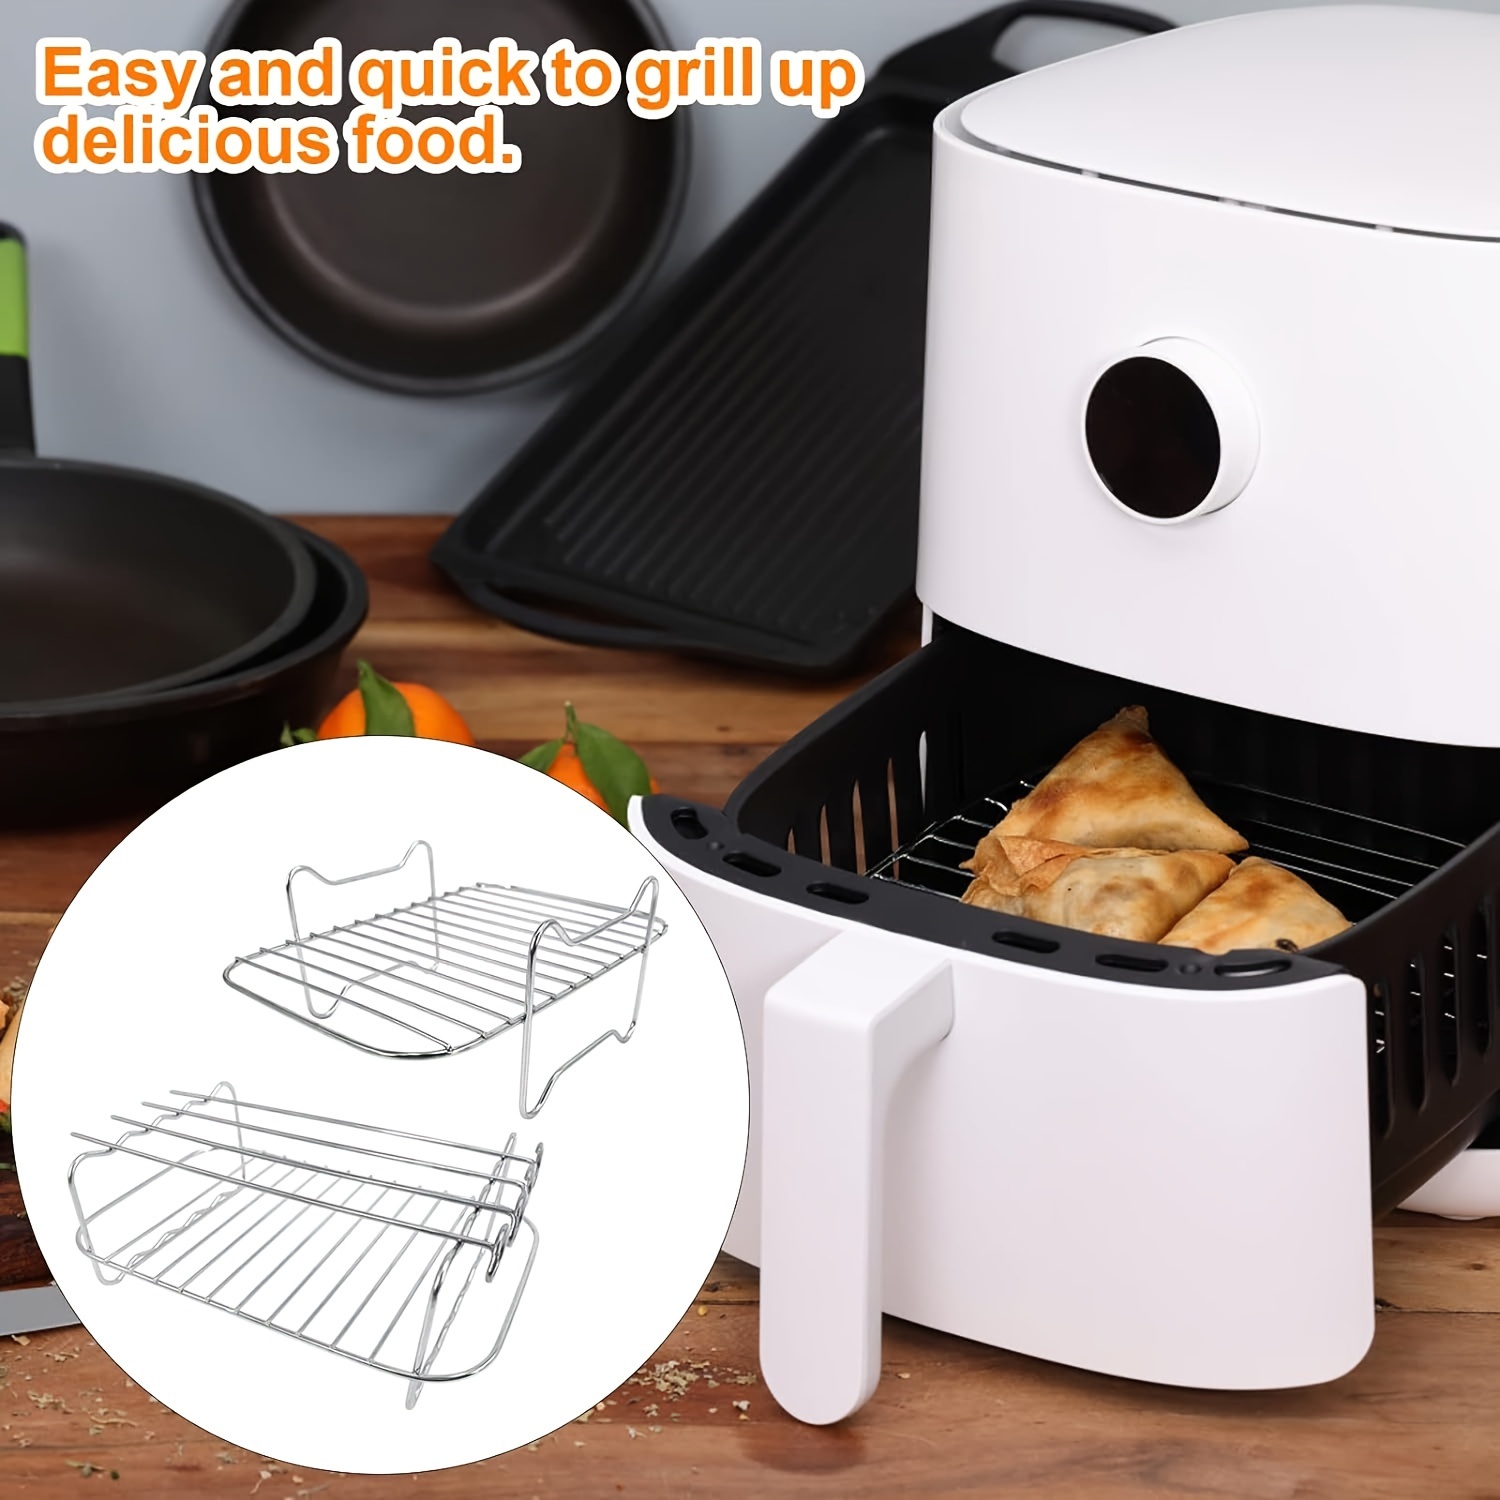 Air Fryer Accessories Compatible with Ninja Foodi Grill 5 in 1